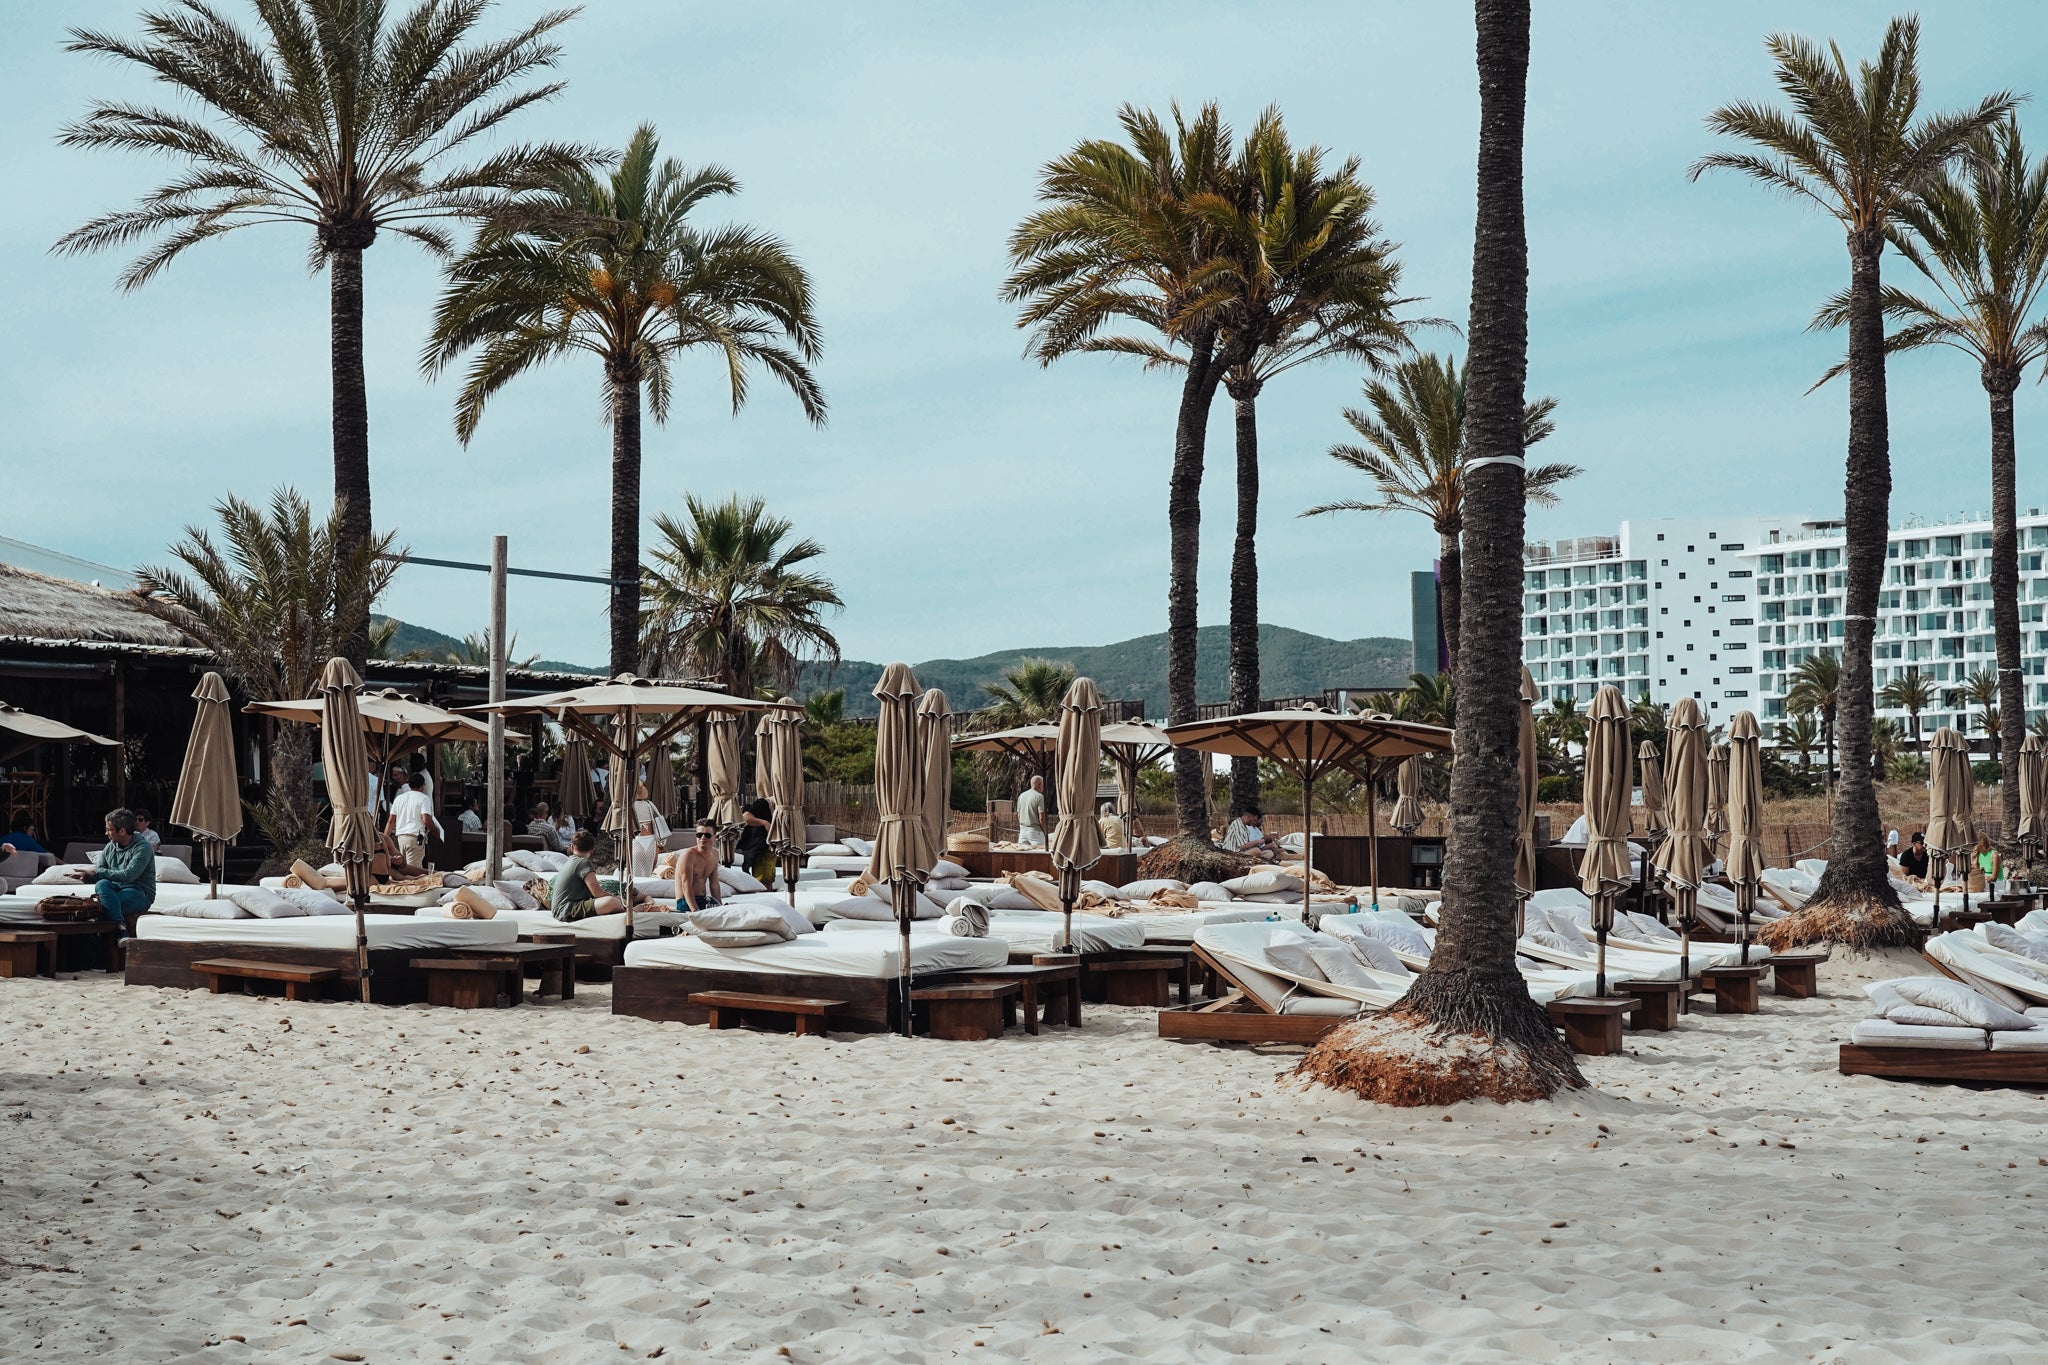 Climate Activism in Ibiza: A Call for Awareness and Change